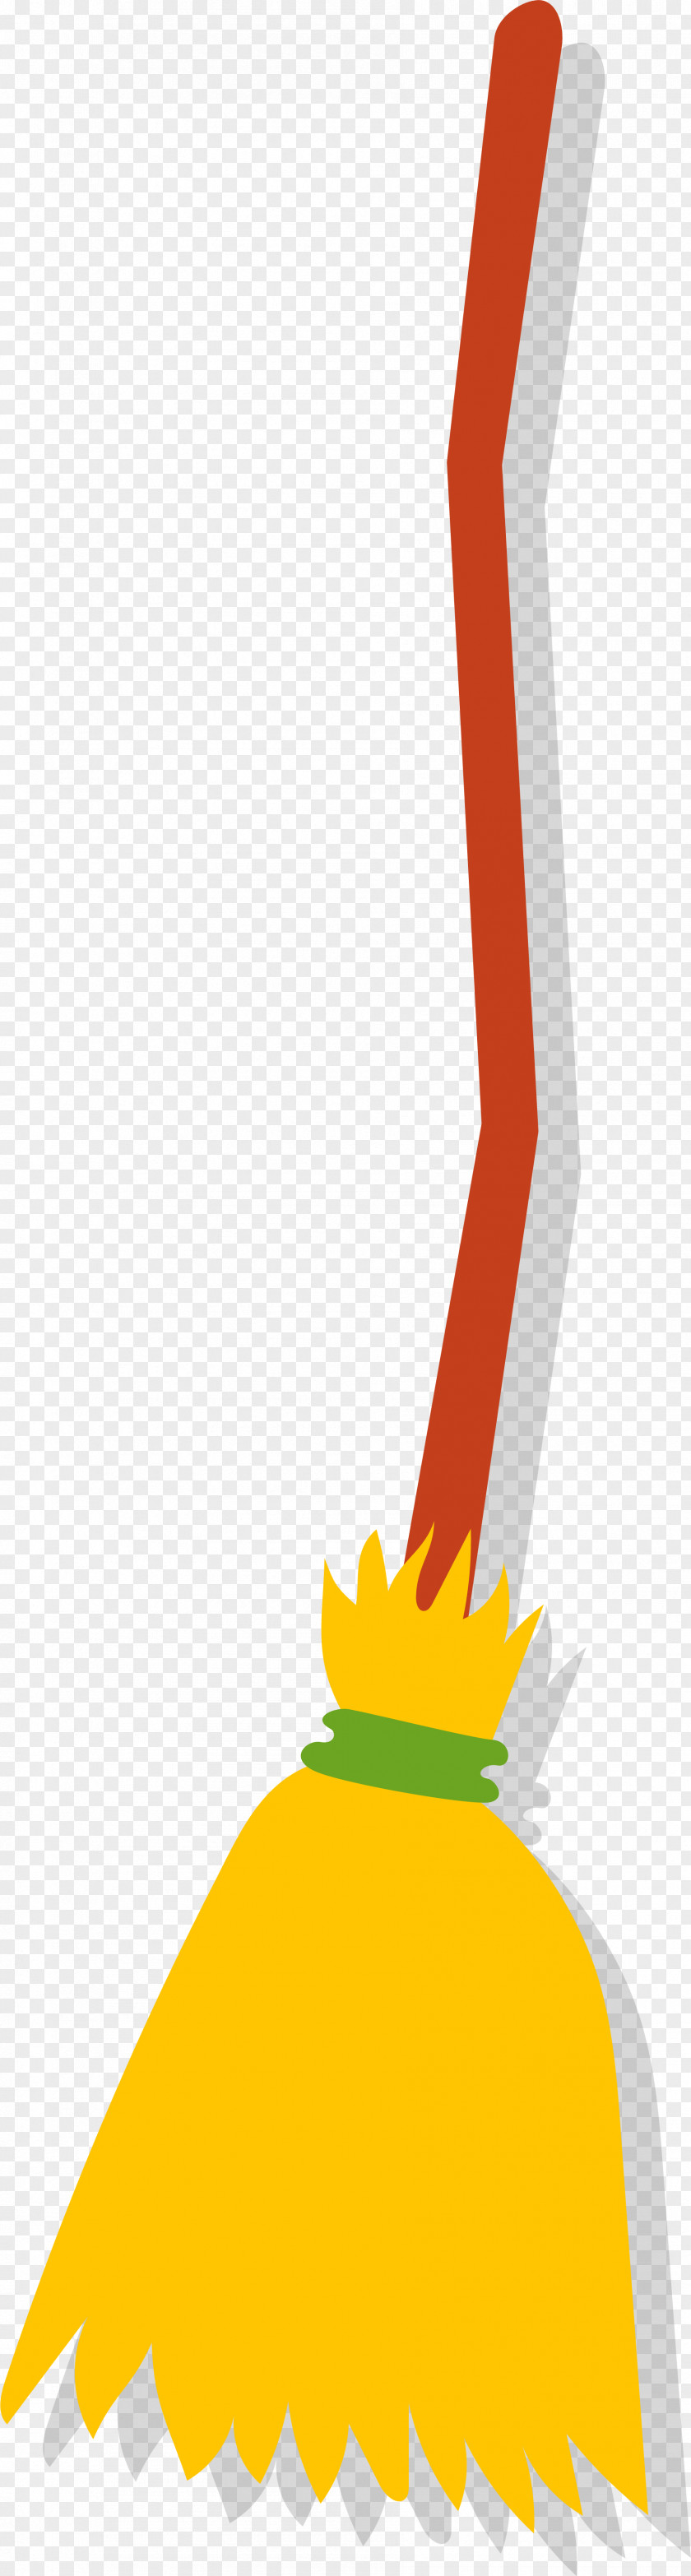 Cartoon Witches Broom PNG